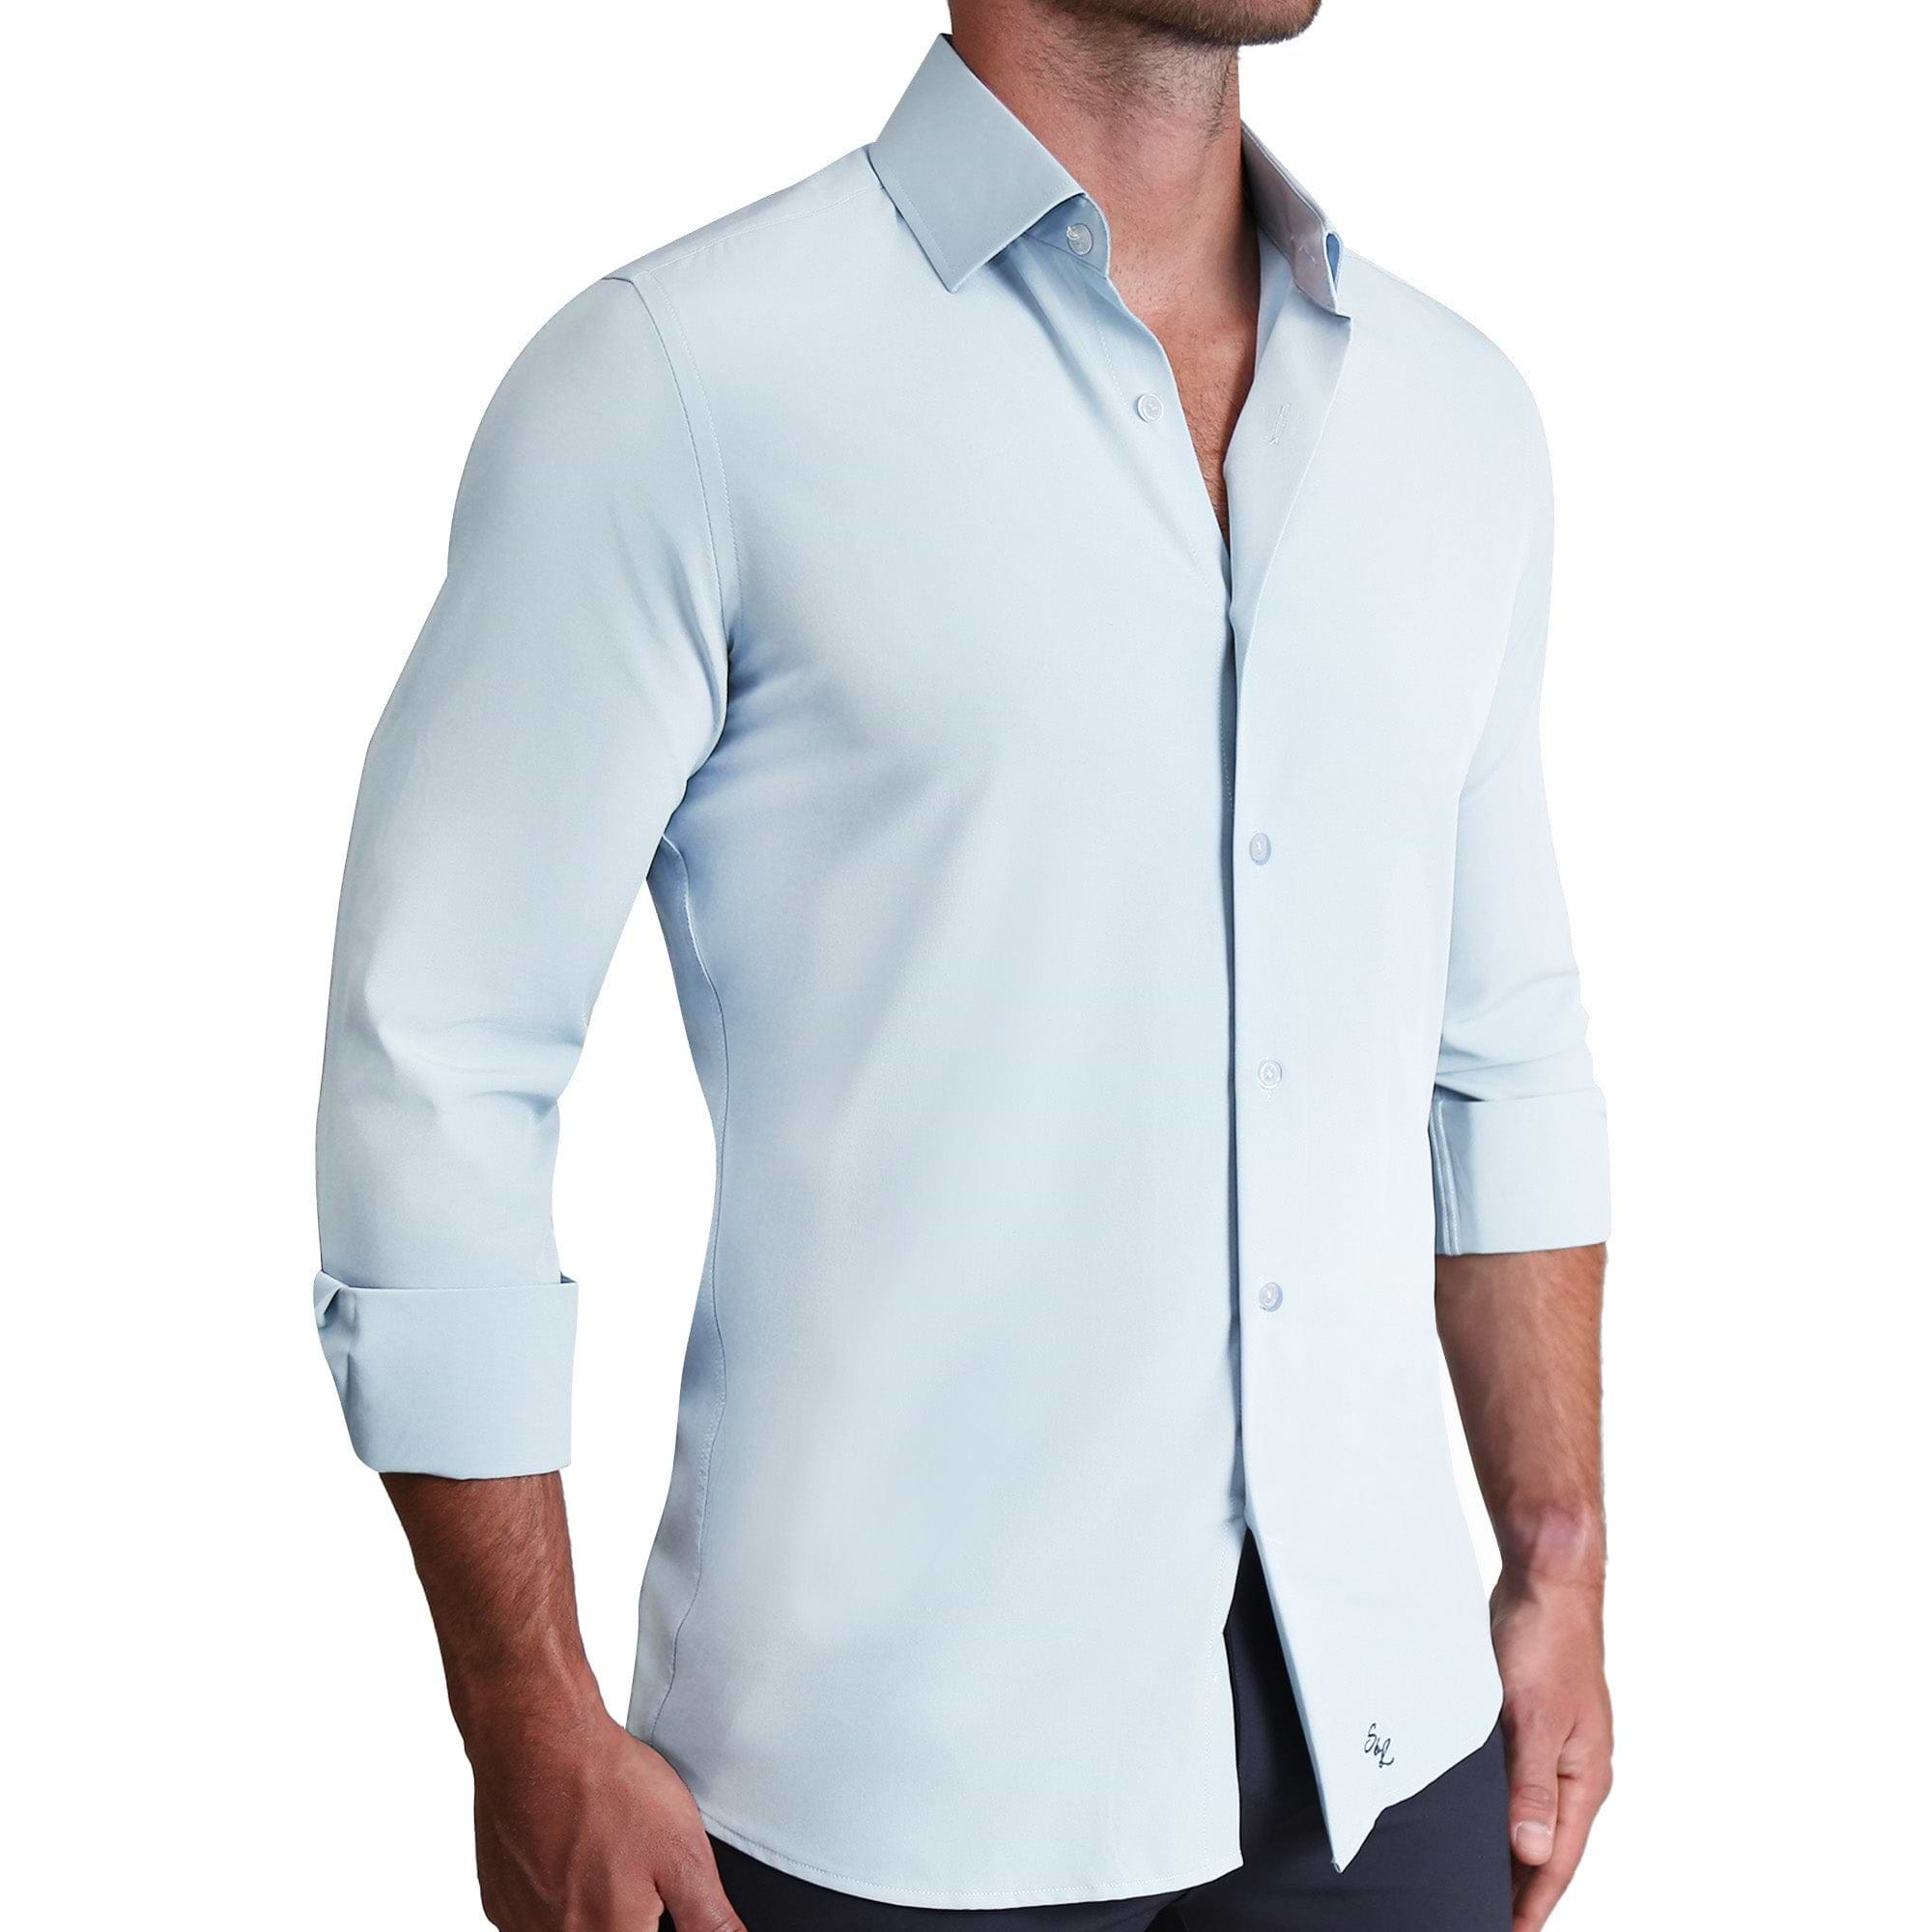 "The Javier" Pale Blue - Classic Fit